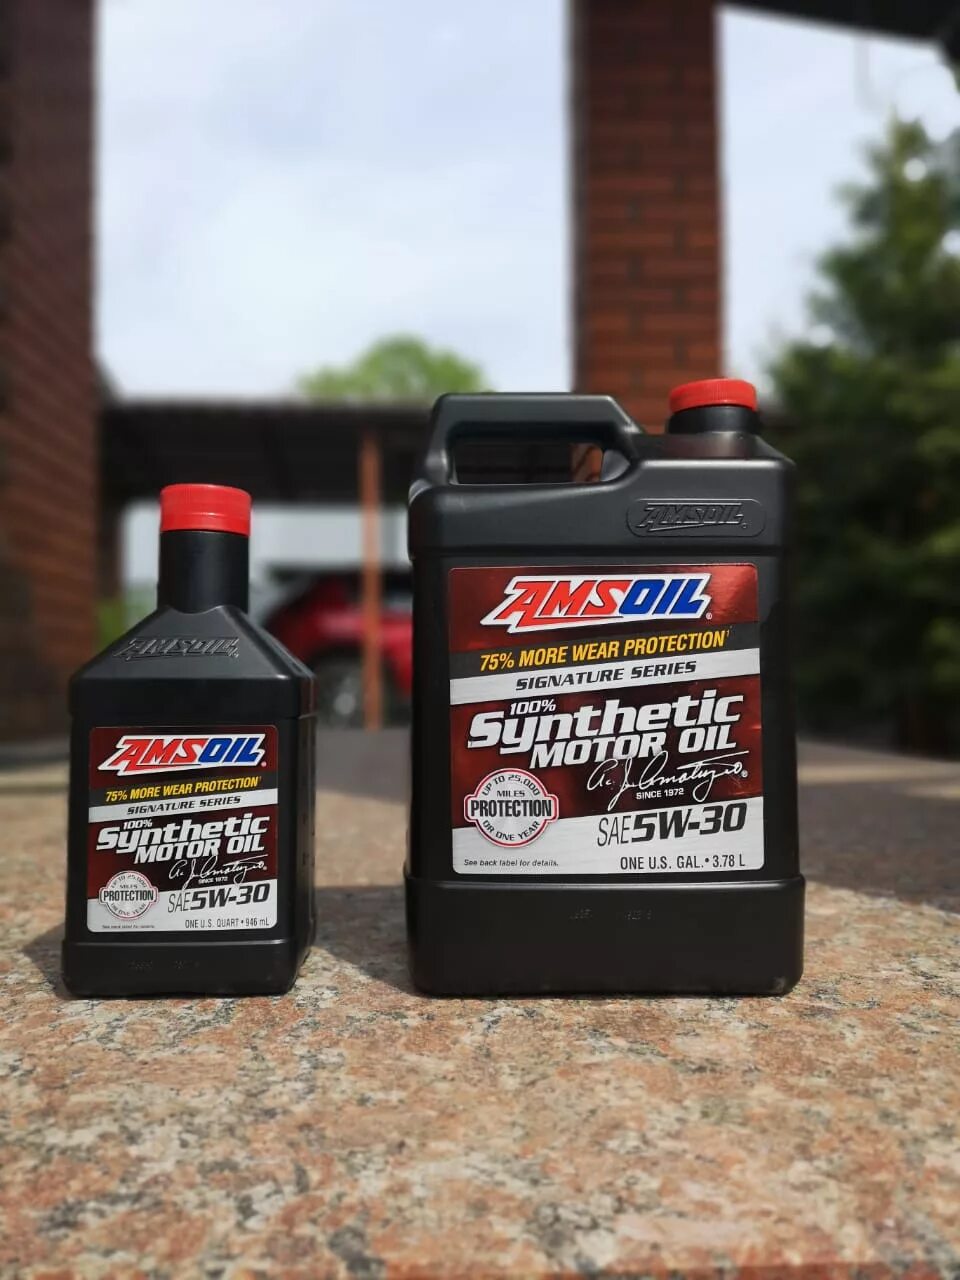 Signature series synthetic. AMSOIL 5w30 Signature. AMSOIL Signature Series 5w-30. AMSOIL Signature Series Synthetic 5w-30. AMSOIL 5w30 fuel Synthetic.